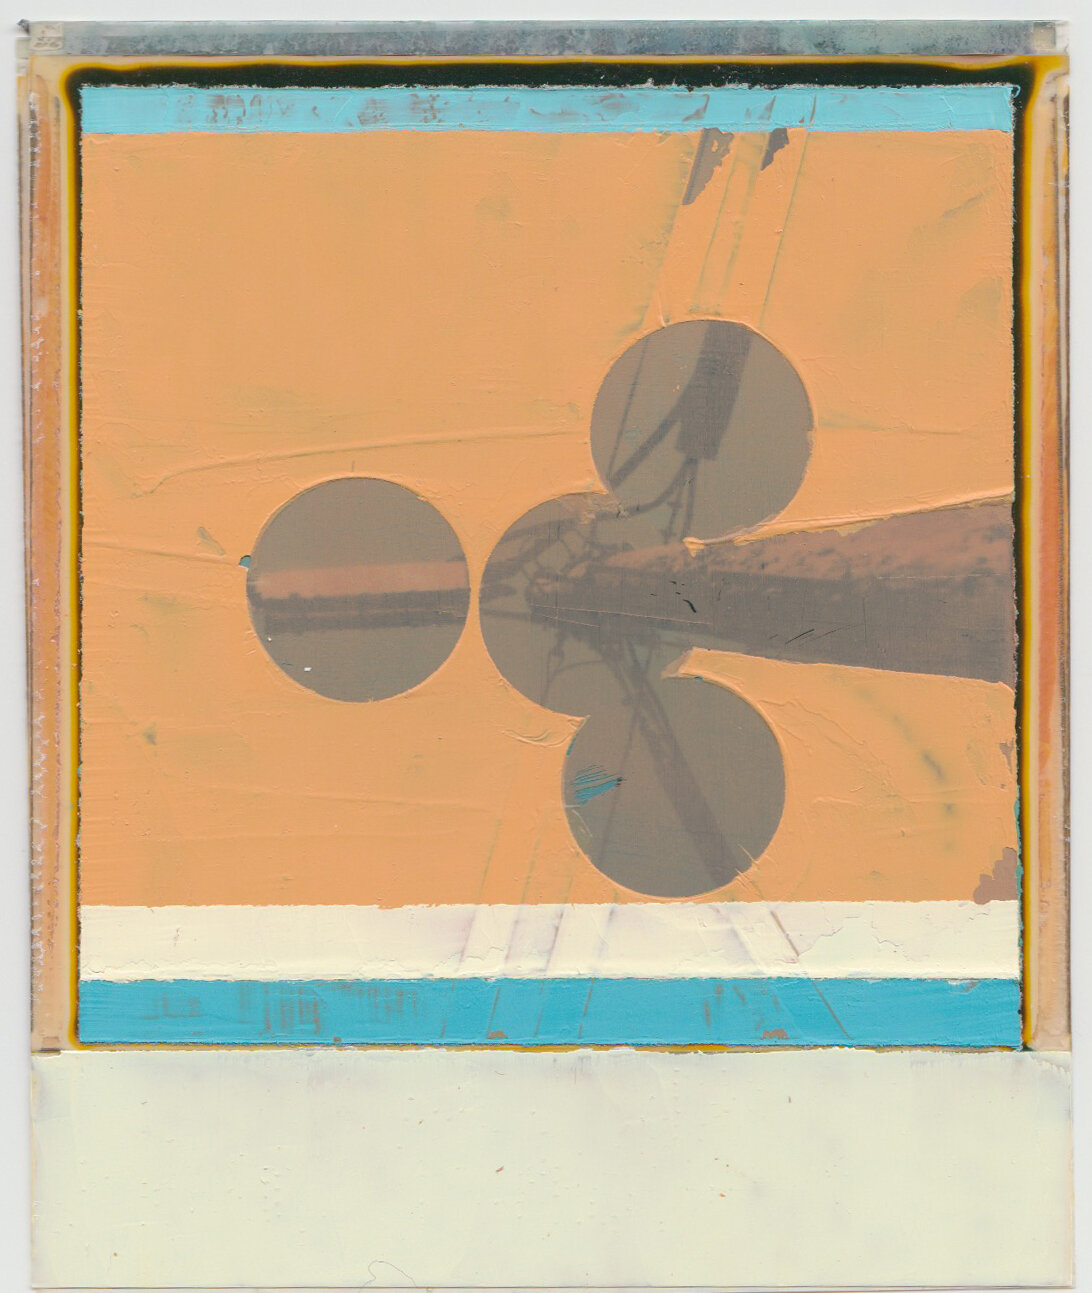   INTERSECTION (THINGS ARE LOOKING UP)   oil on sx-70 Polaroid | 3.25" x 4.25" | 2019 